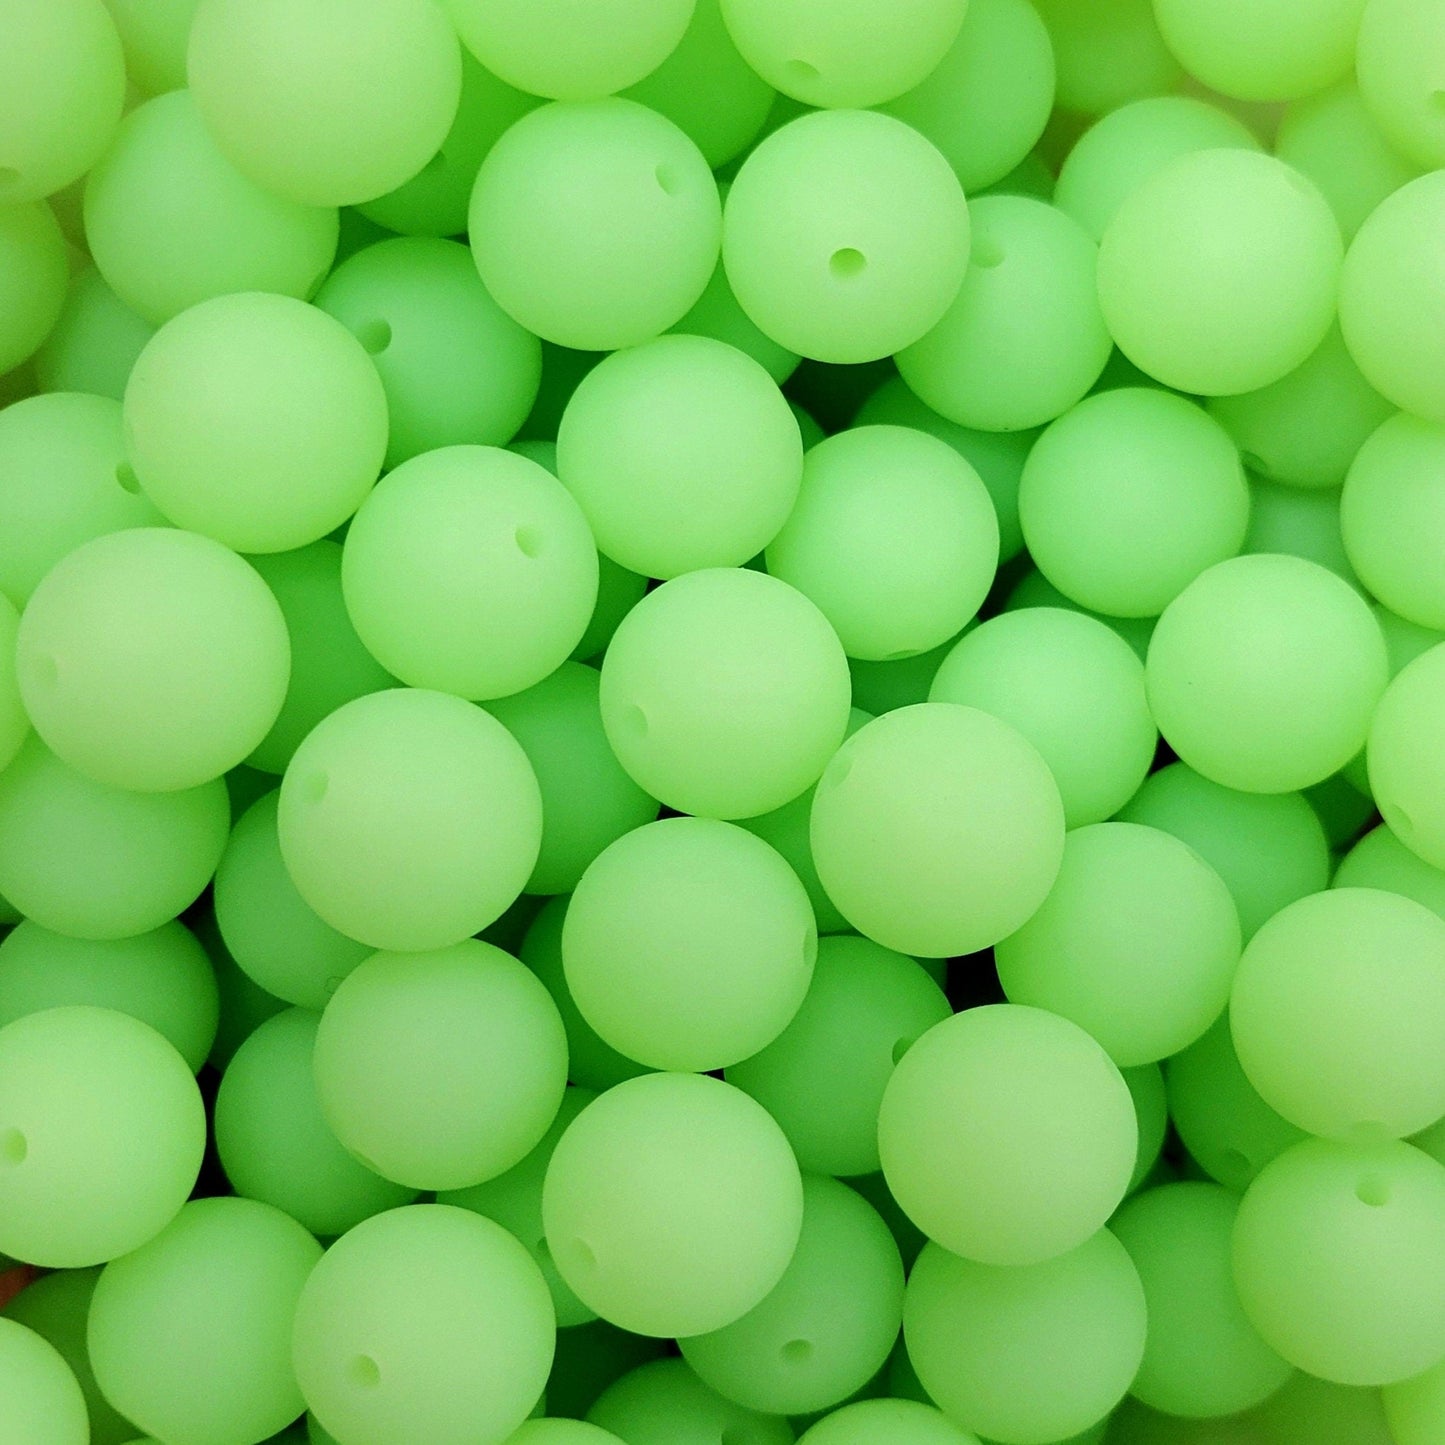 Glow in the Dark Round Silicone Beads | 15mm